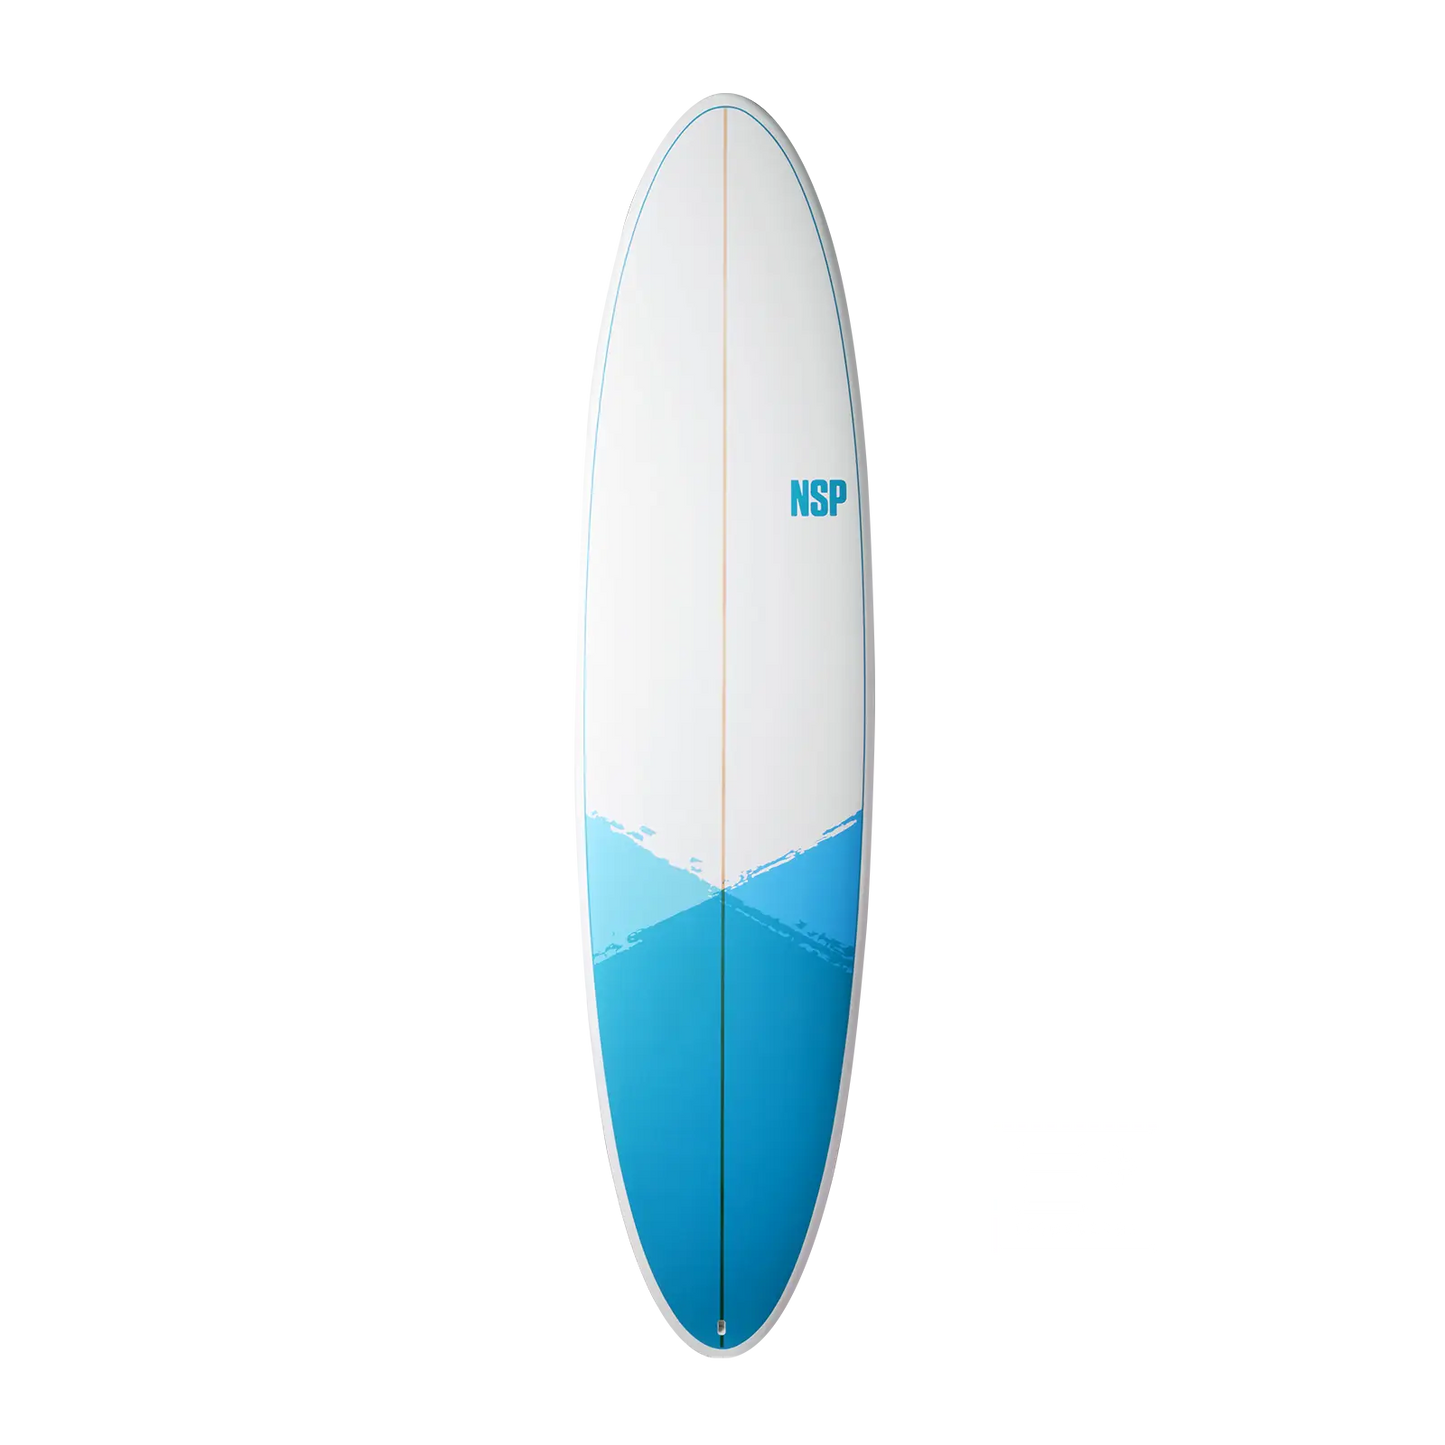 NSP Funboard E+ 7'6" | 54.4 L Navy Water NSP Europe